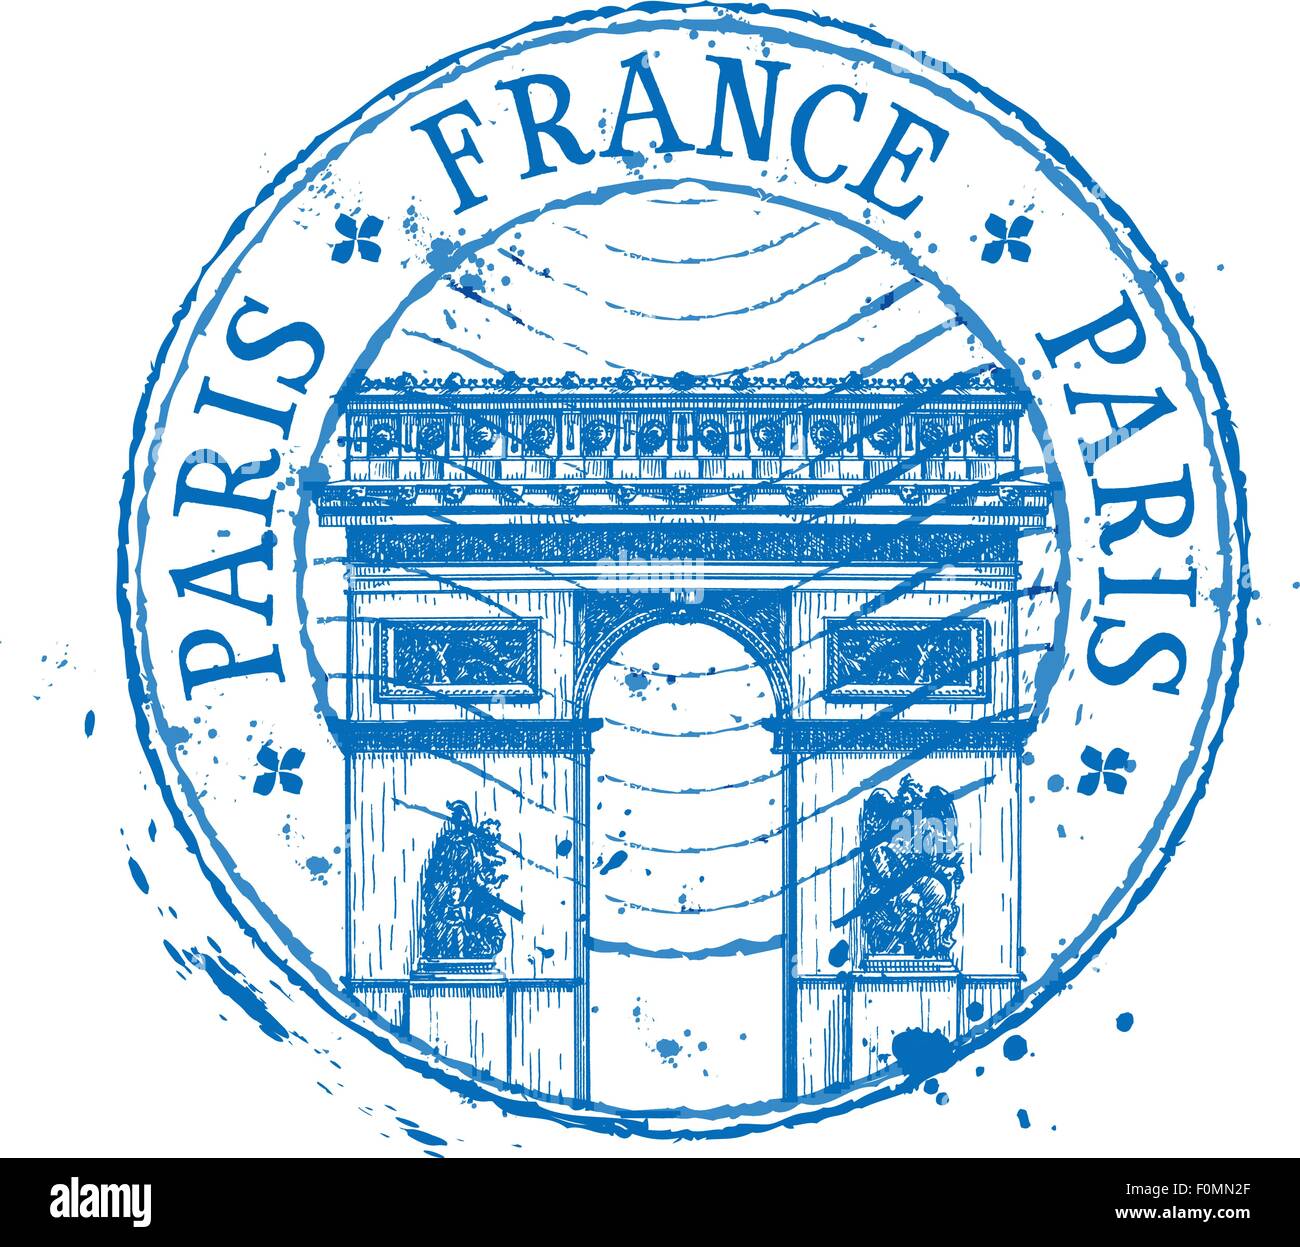 France vector logo design template. stamp or Paris, architecture icon ...